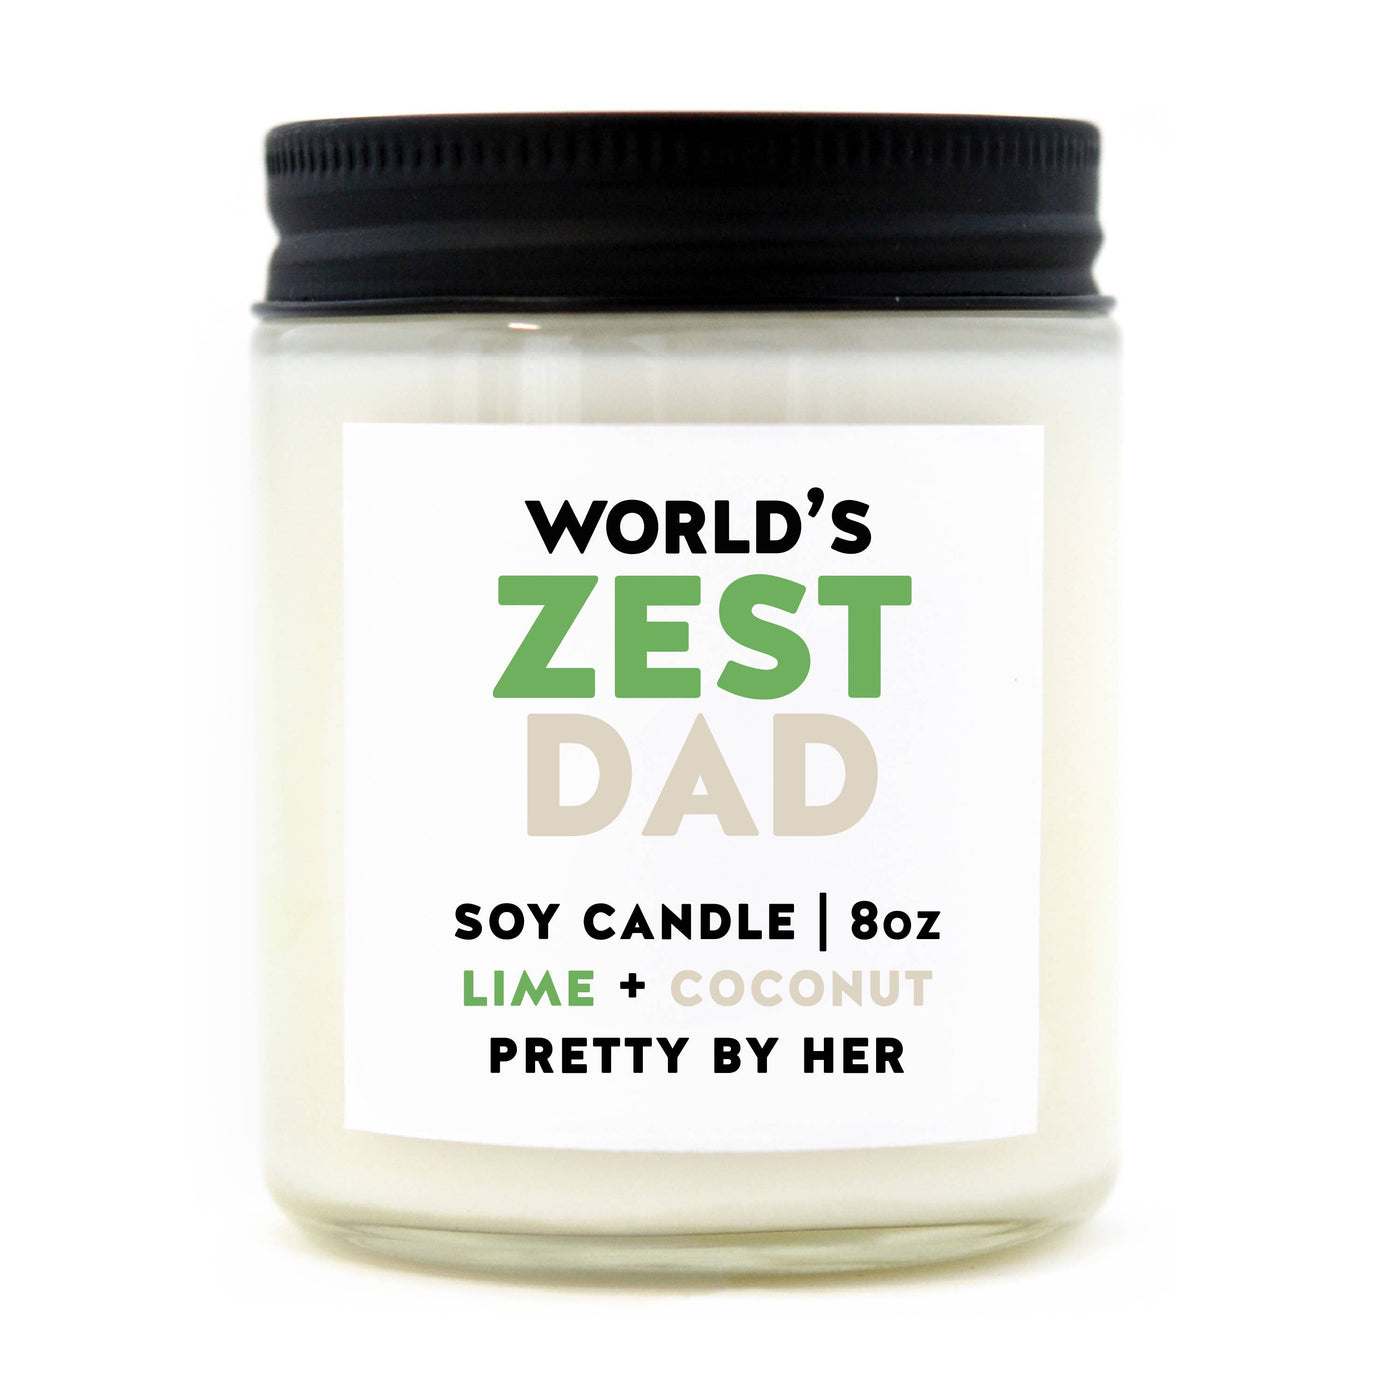 WORLD'S ZEST DAD CANDLE